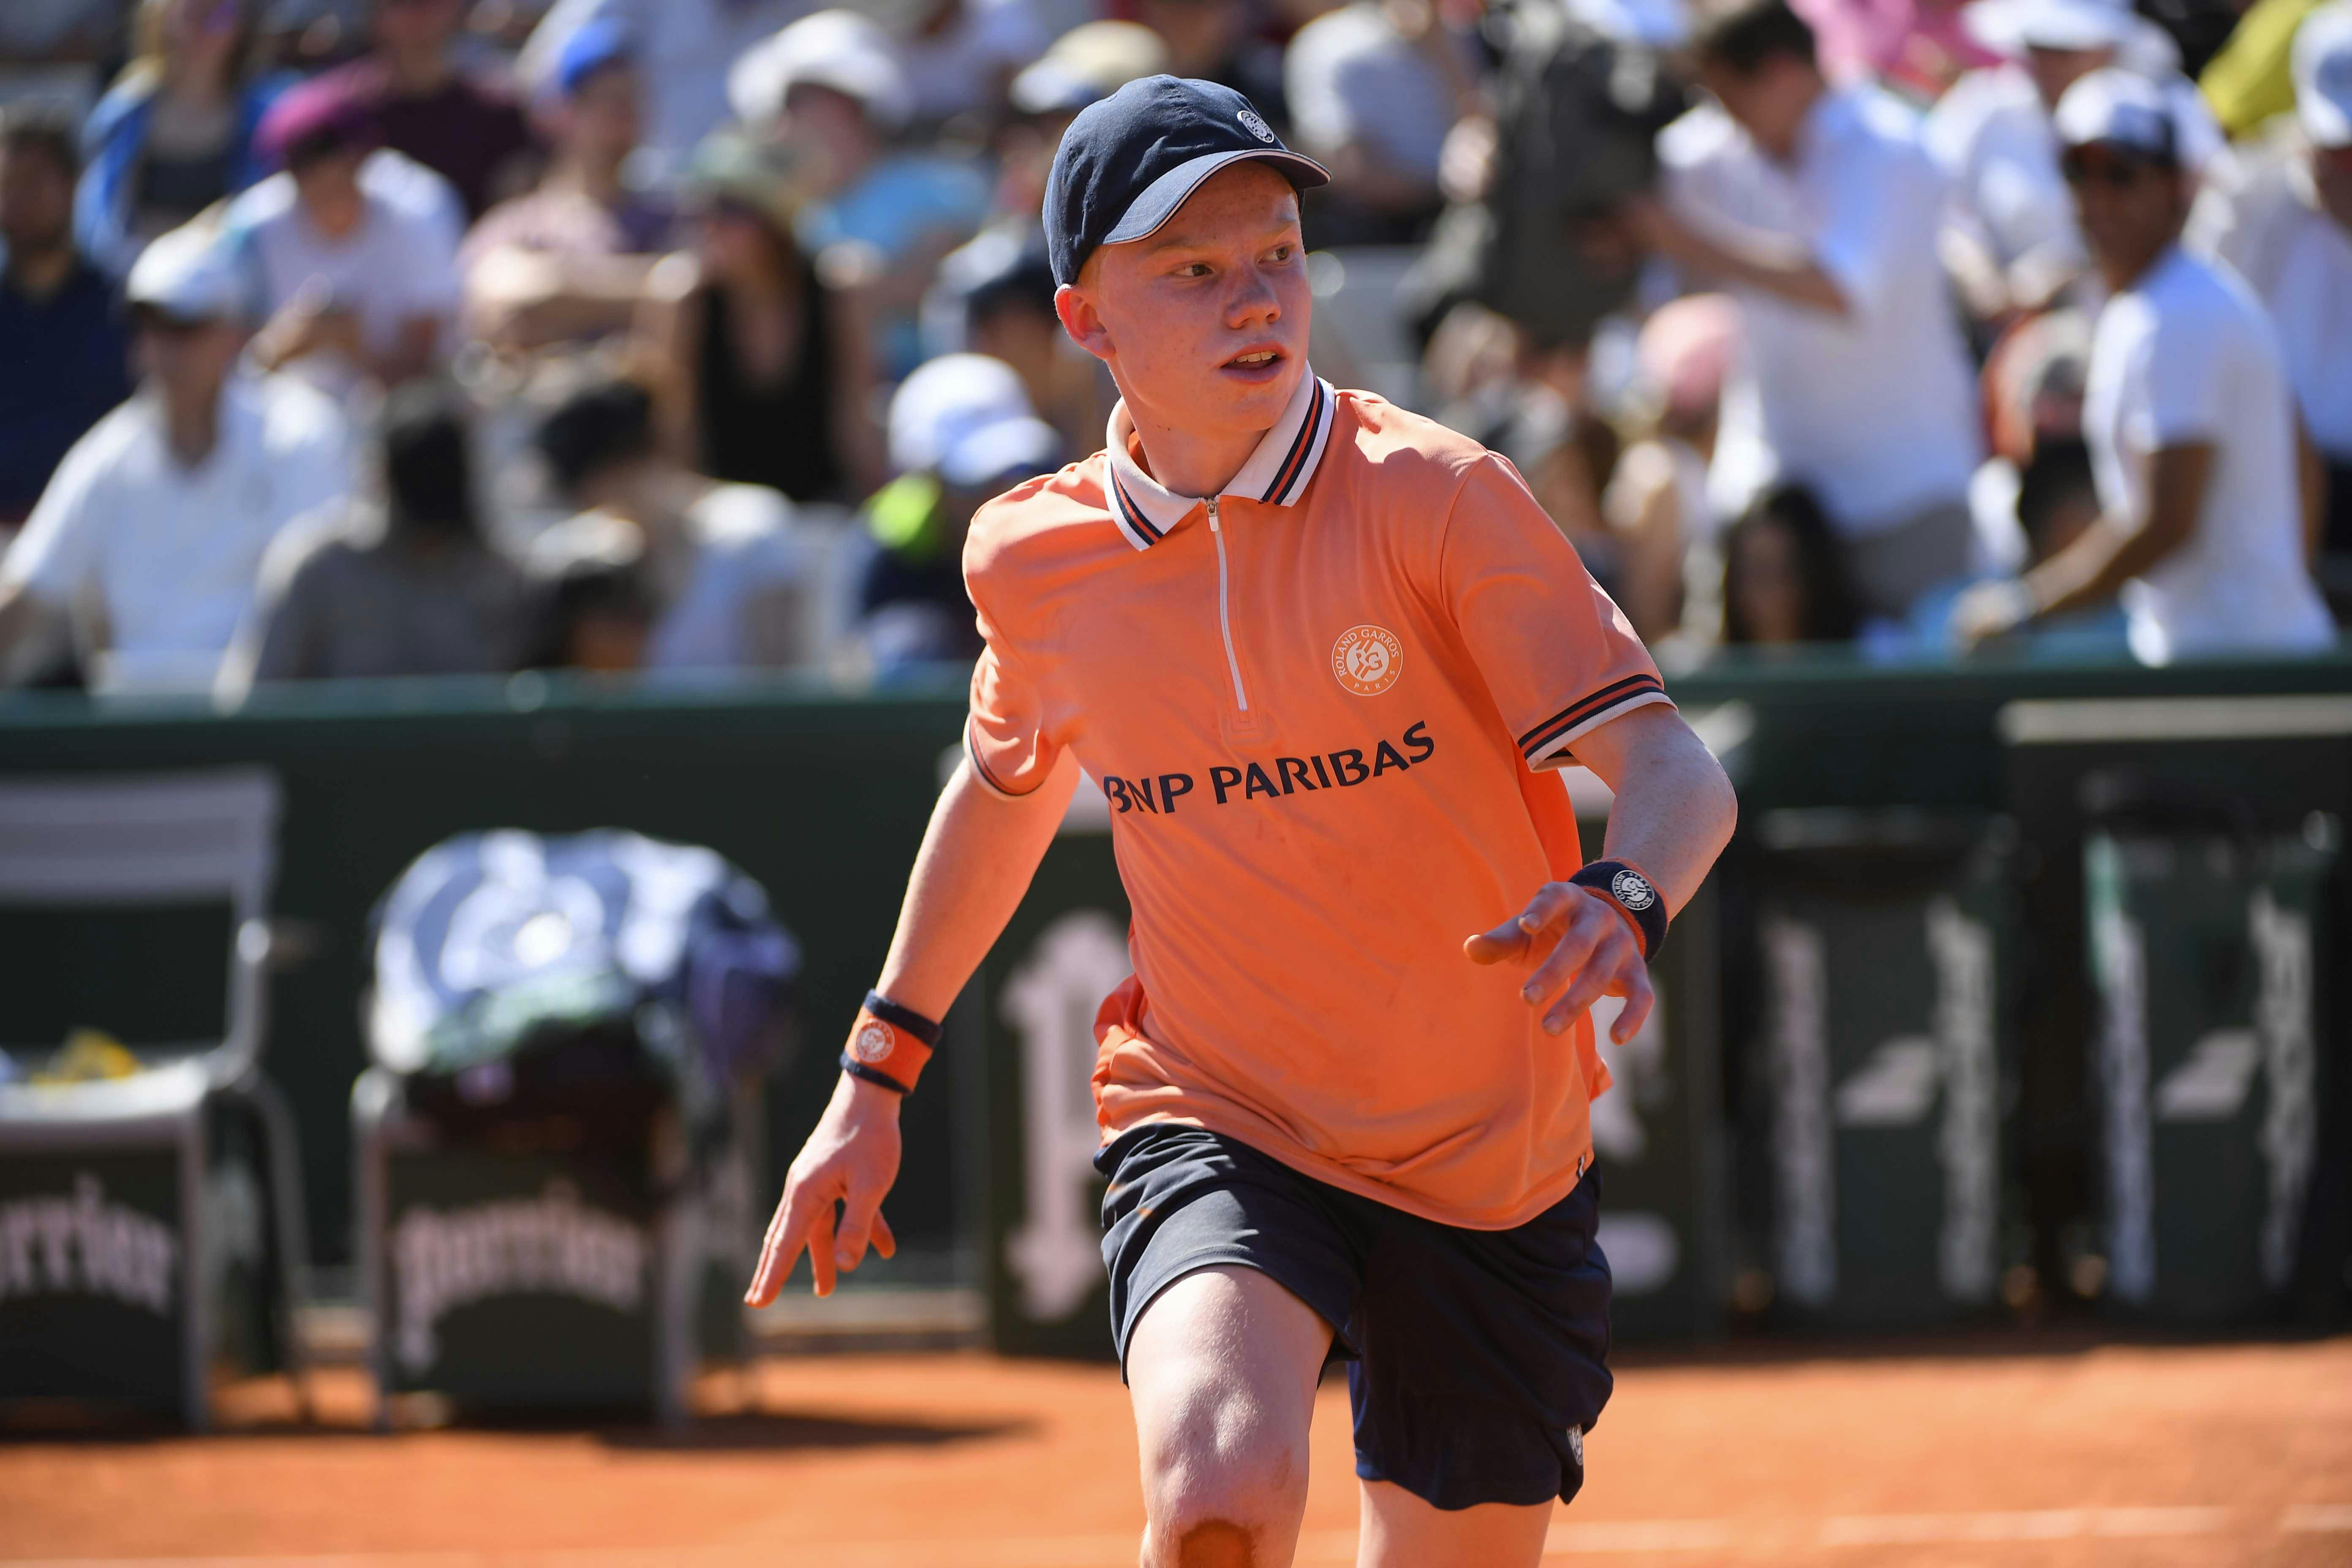 Day In The Life Ball Kids Roland Garros The 21 Roland Garros Tournament Official Site